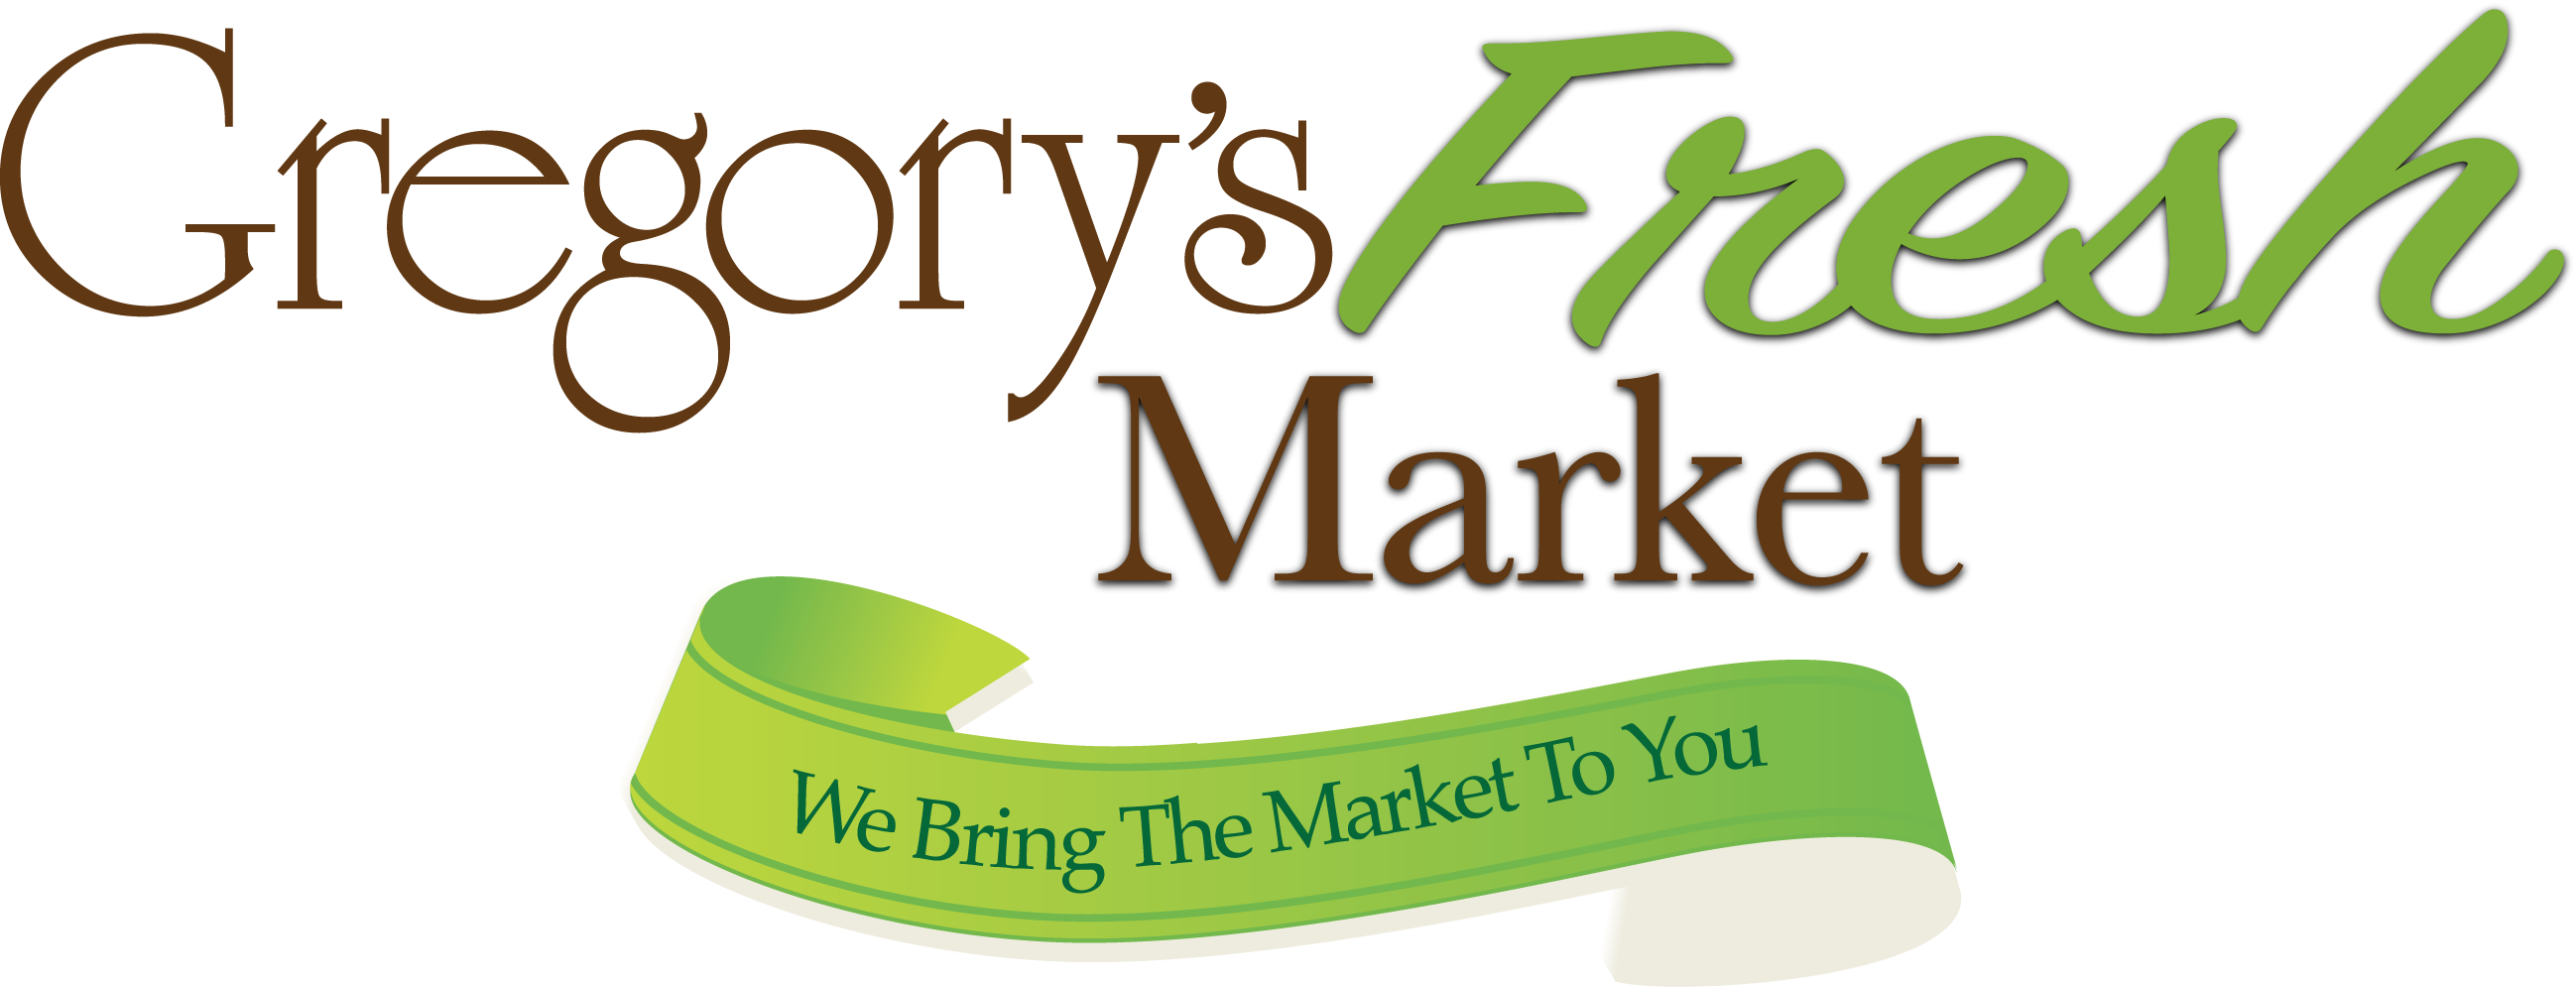 Gregory's Fresh Market | Diana Gregory Outreach Service